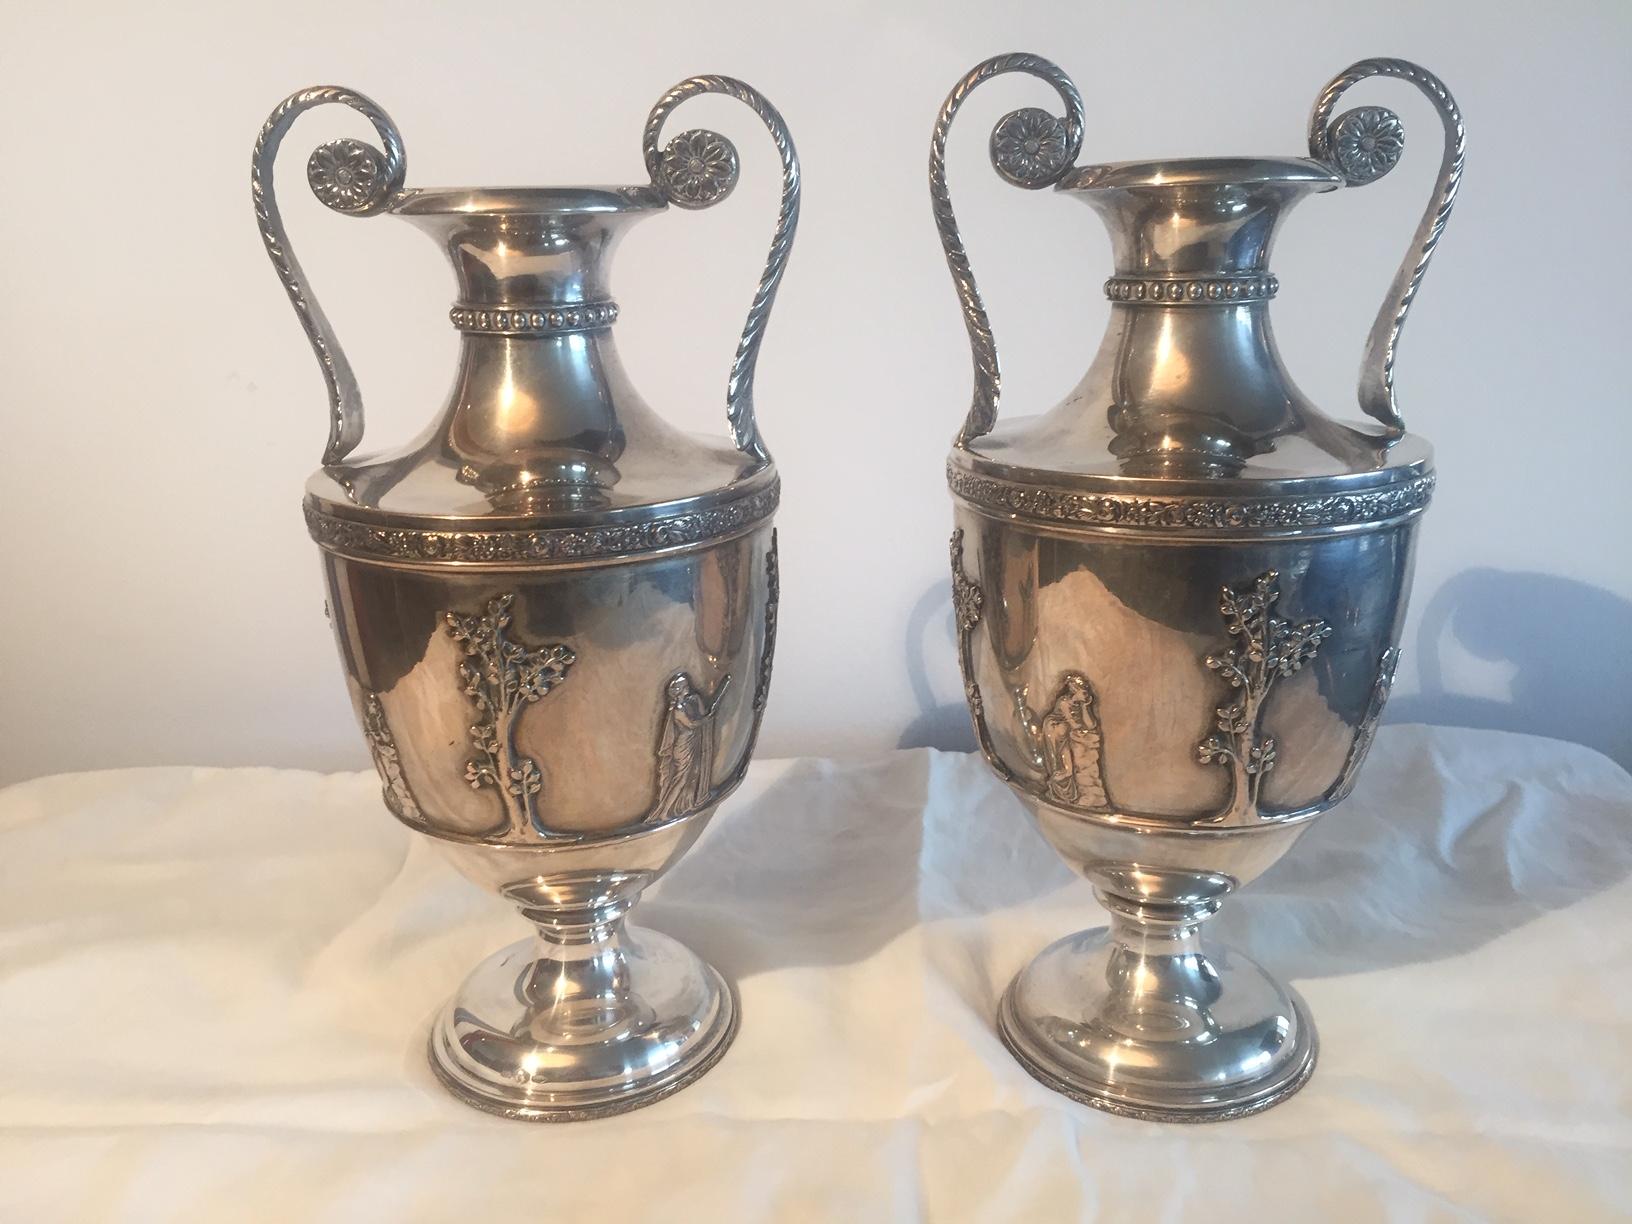 Pair of mid-20th century Italian .800 silver vases or trophy cups, hand casted neoclassical style double handled vases. They bear Italian maker's hallmark and the silver mark for European (Italian) Silver. Each cup is embellished with baluster form,